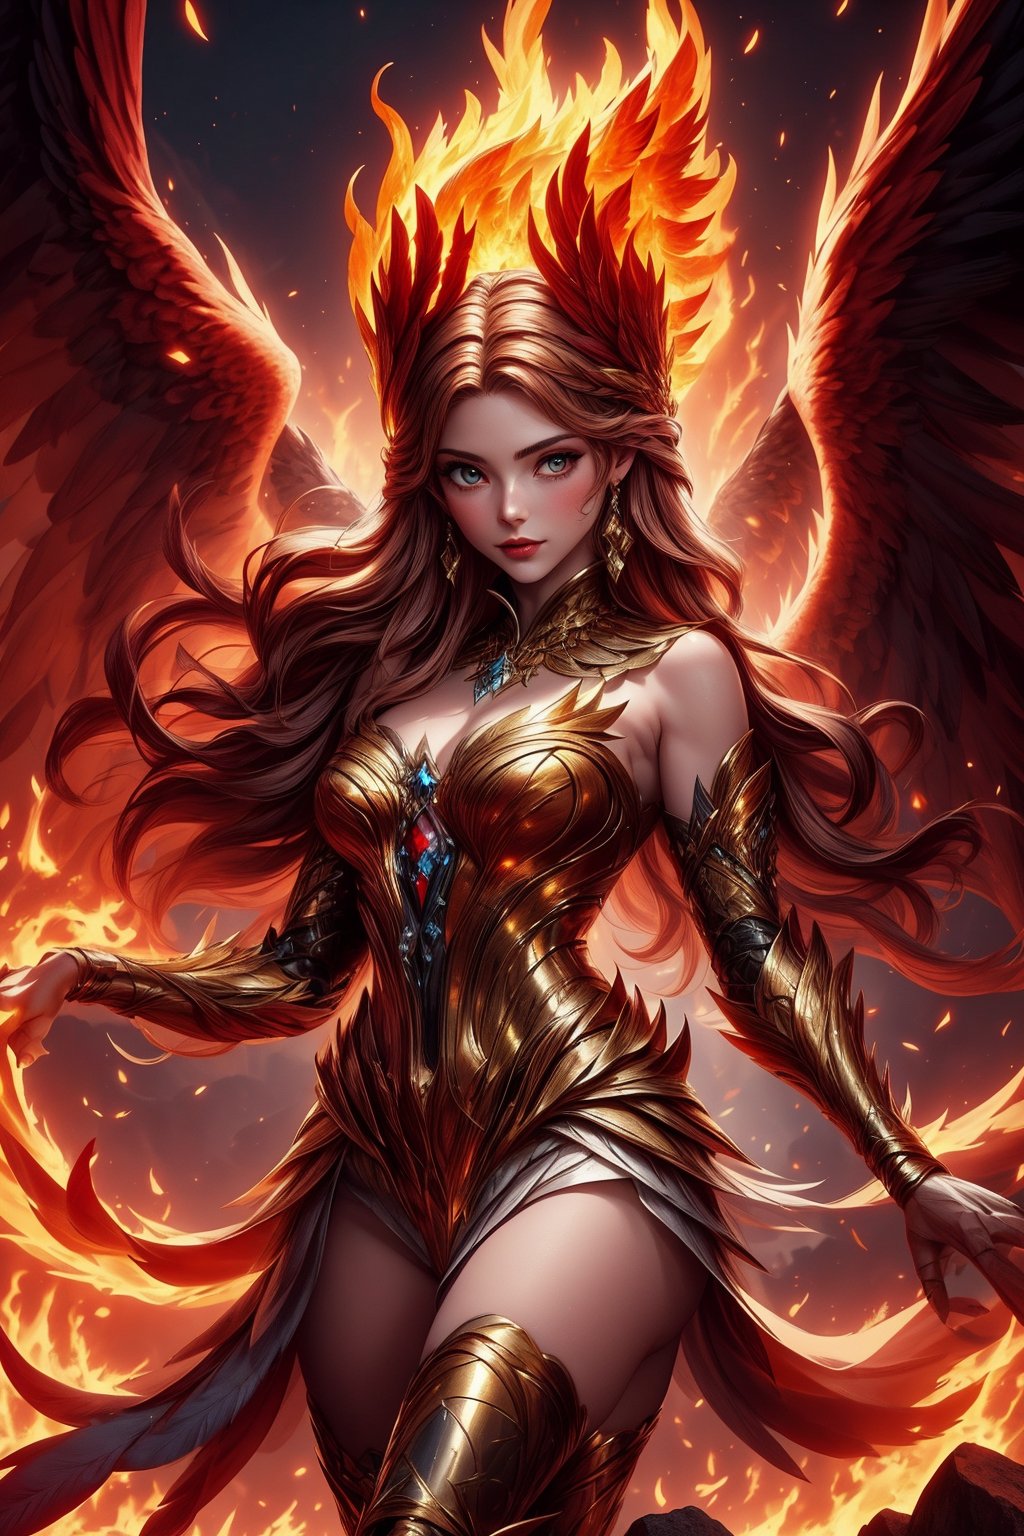 Odette with fiery red and gold robes adorned with phoenix feathers and embers. Her hair should blaze like fire, crowned with a fiery phoenix headdress. Her abilities should ignite with flames and phoenix feathers. The surrounding should be a volcanic sanctuary with lava flows, smoldering ruins, and an ancient phoenix statue radiating fiery light, Odette_ML